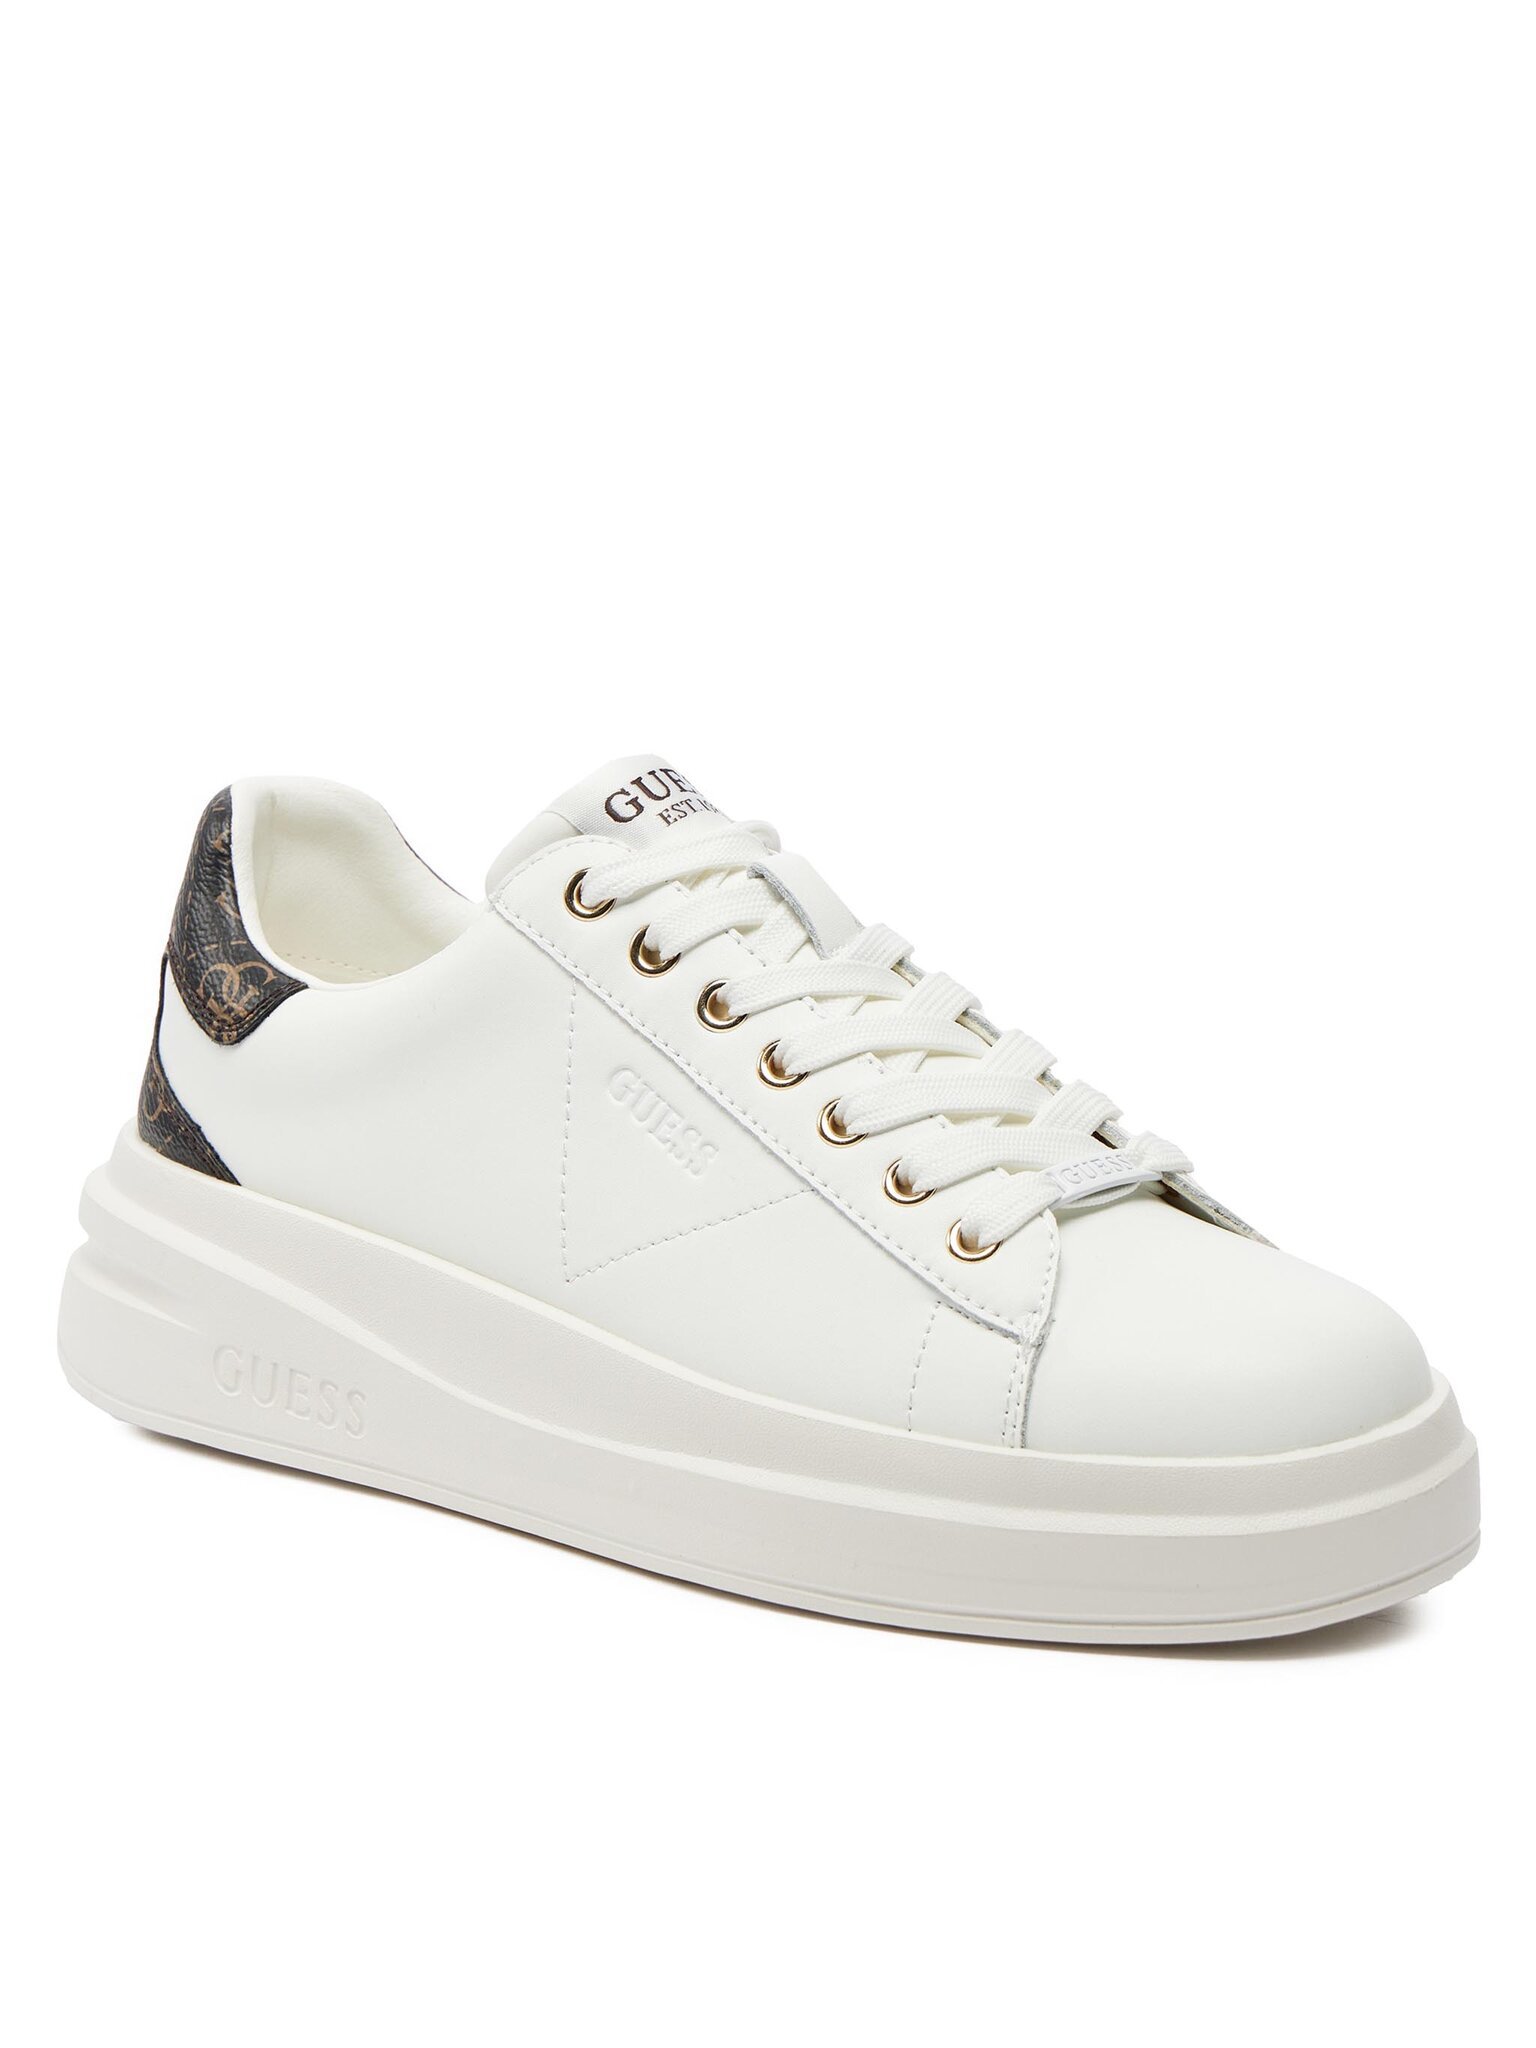 Baskets / Sneakers  Guess jeans FLJELB FAL12 WHITE BROWN